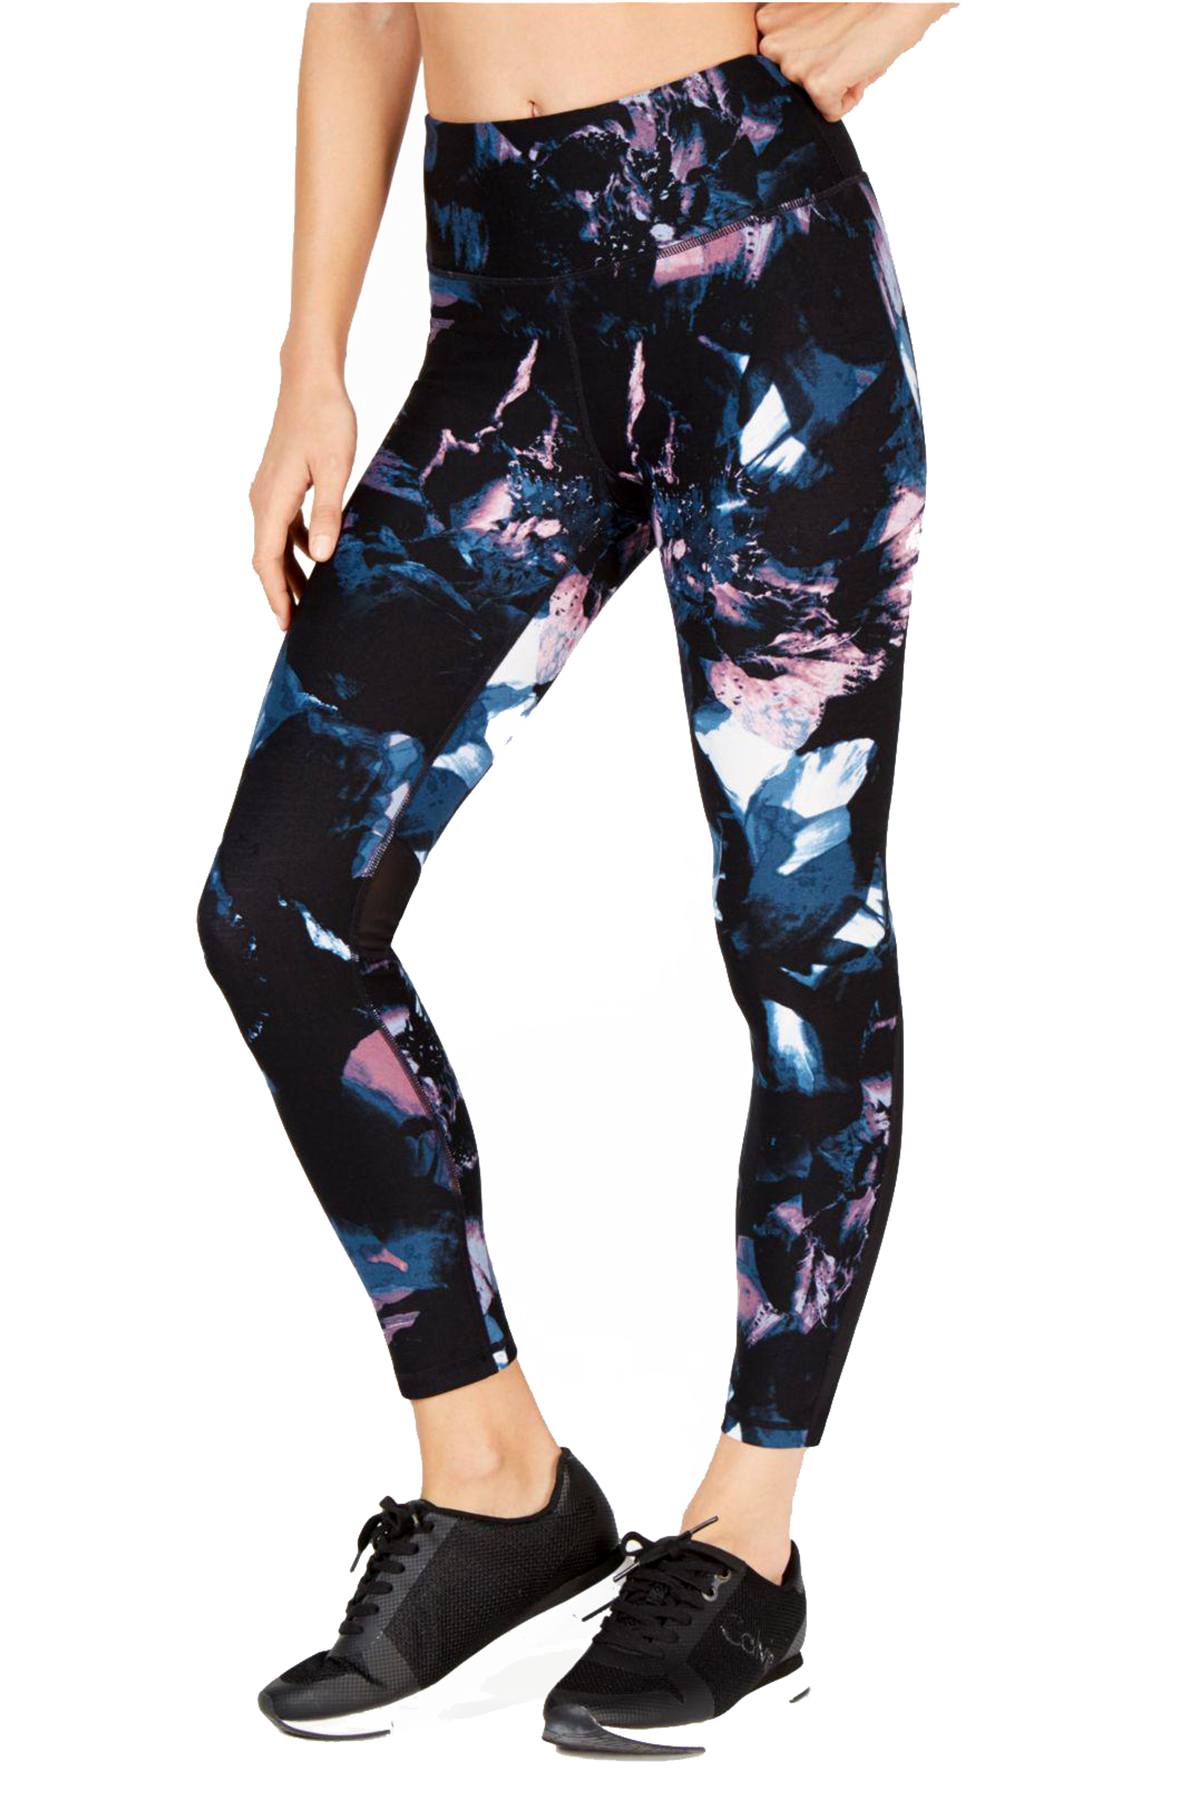 Calvin Klein Performance Eclipse-Combo Printed High-rise